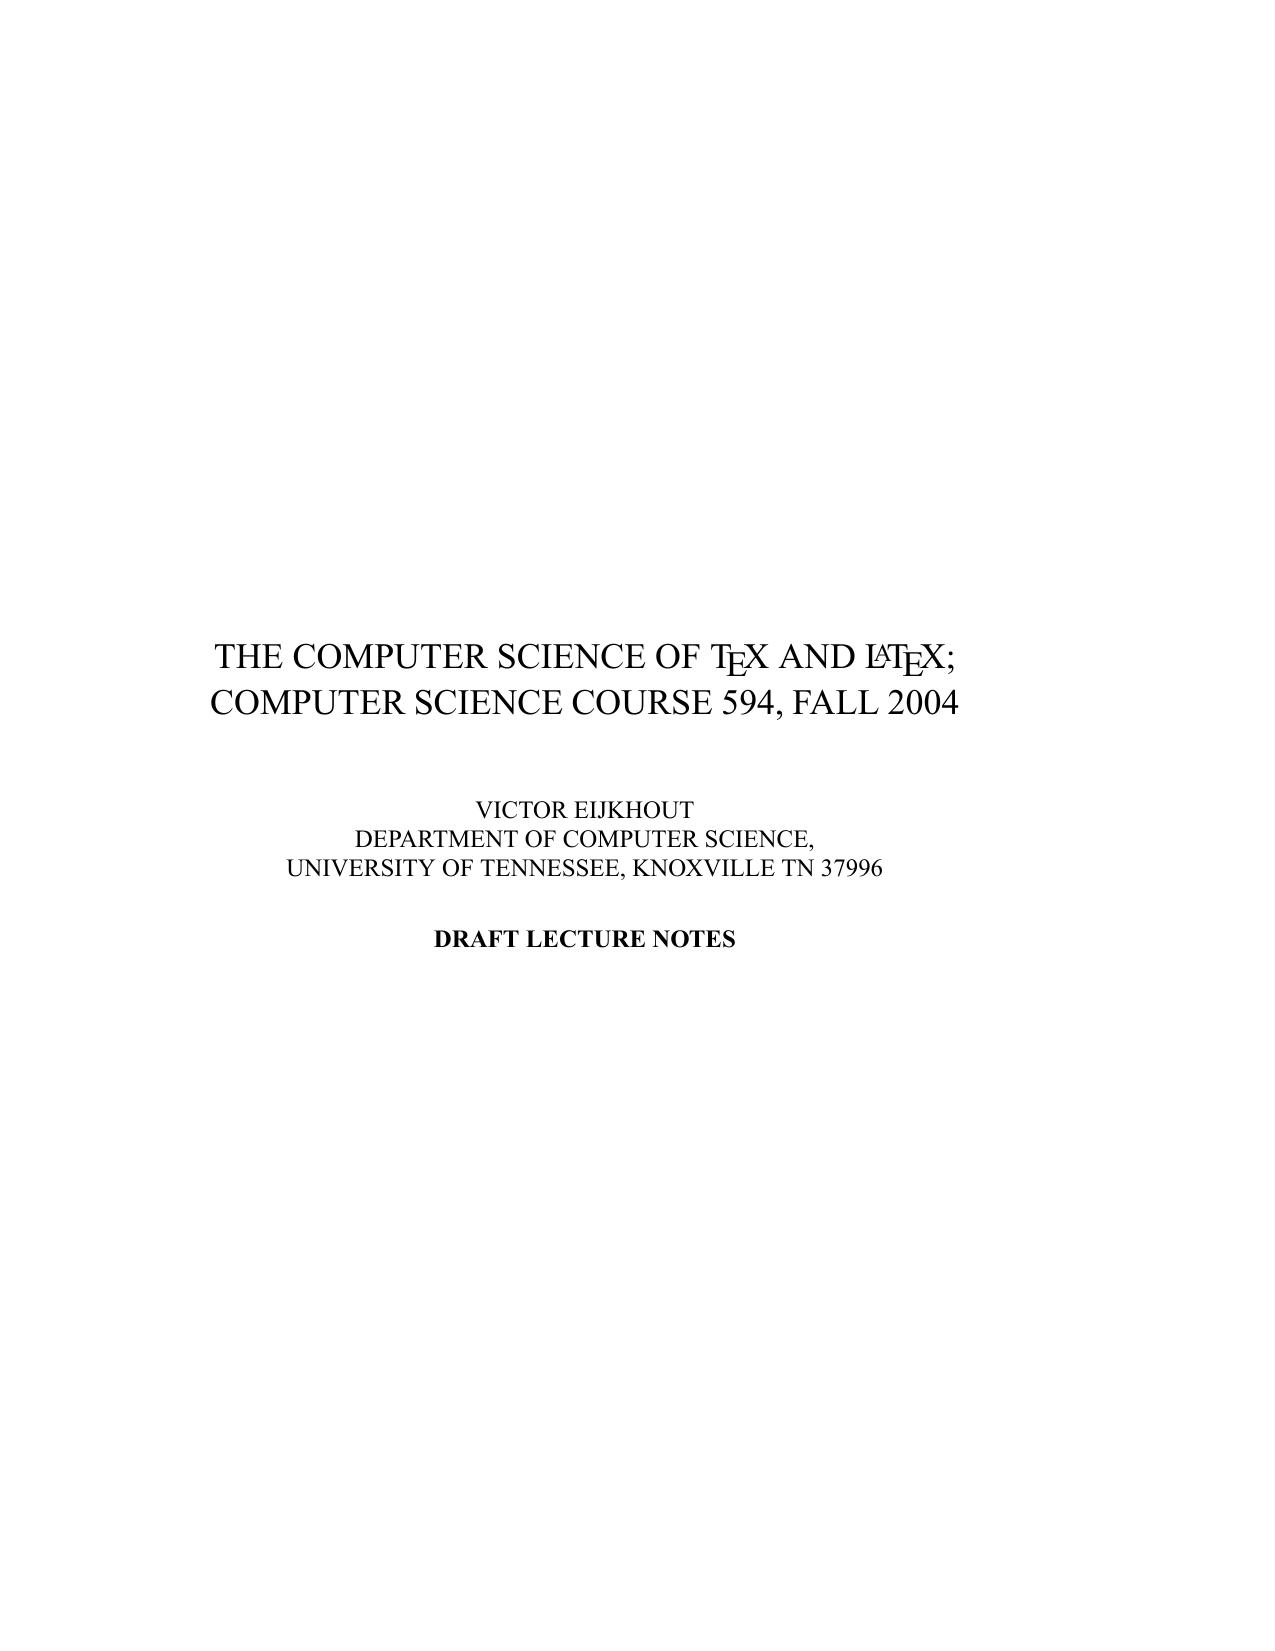 The Computer Science of TeX and LaTeX - Draft Lecture Notes